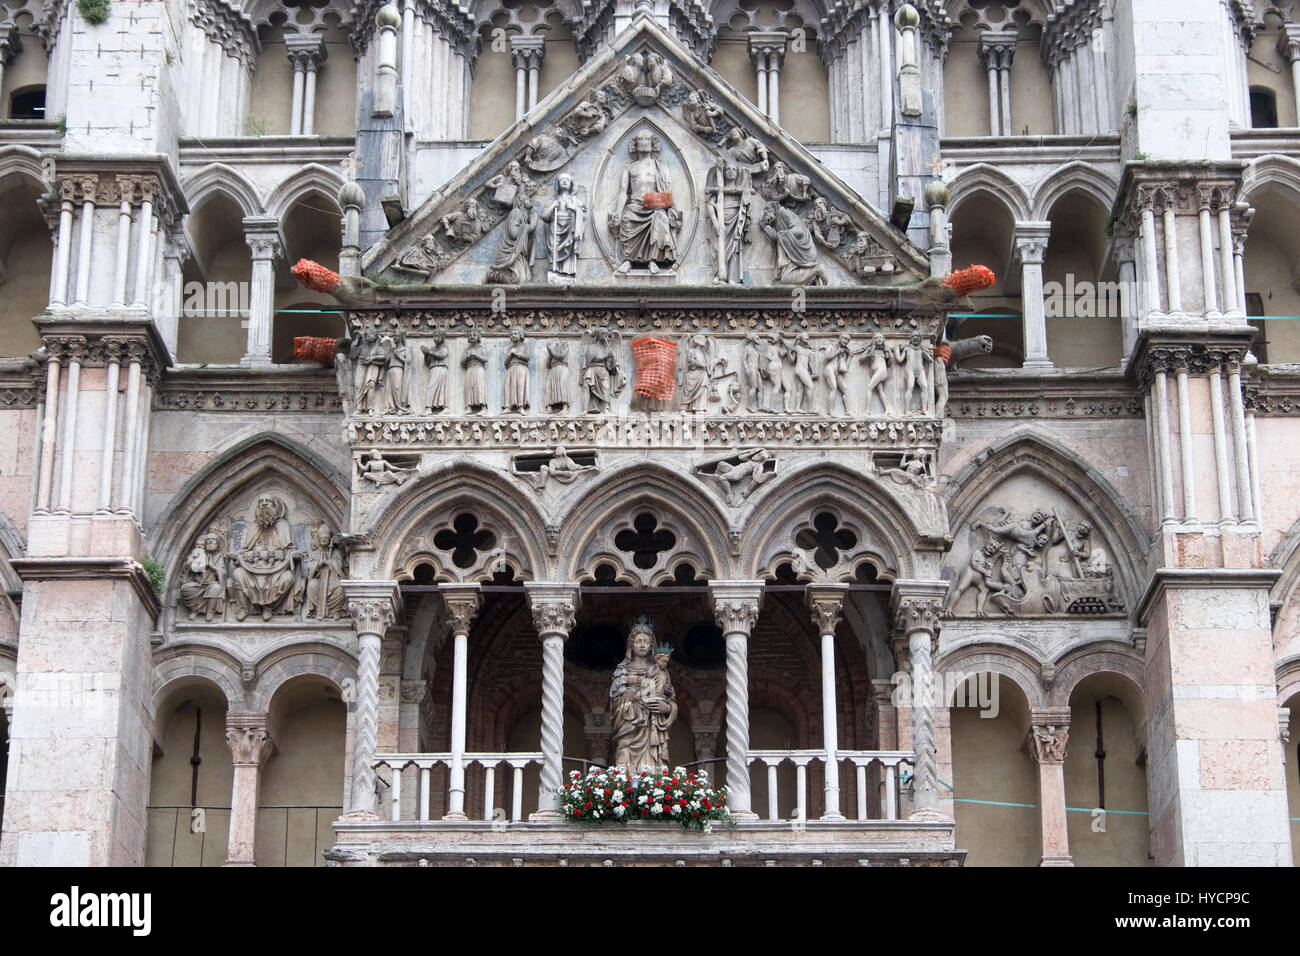 Detail of a late Gothic facade of the cathedral of Ferrara, Italy Stock Photo